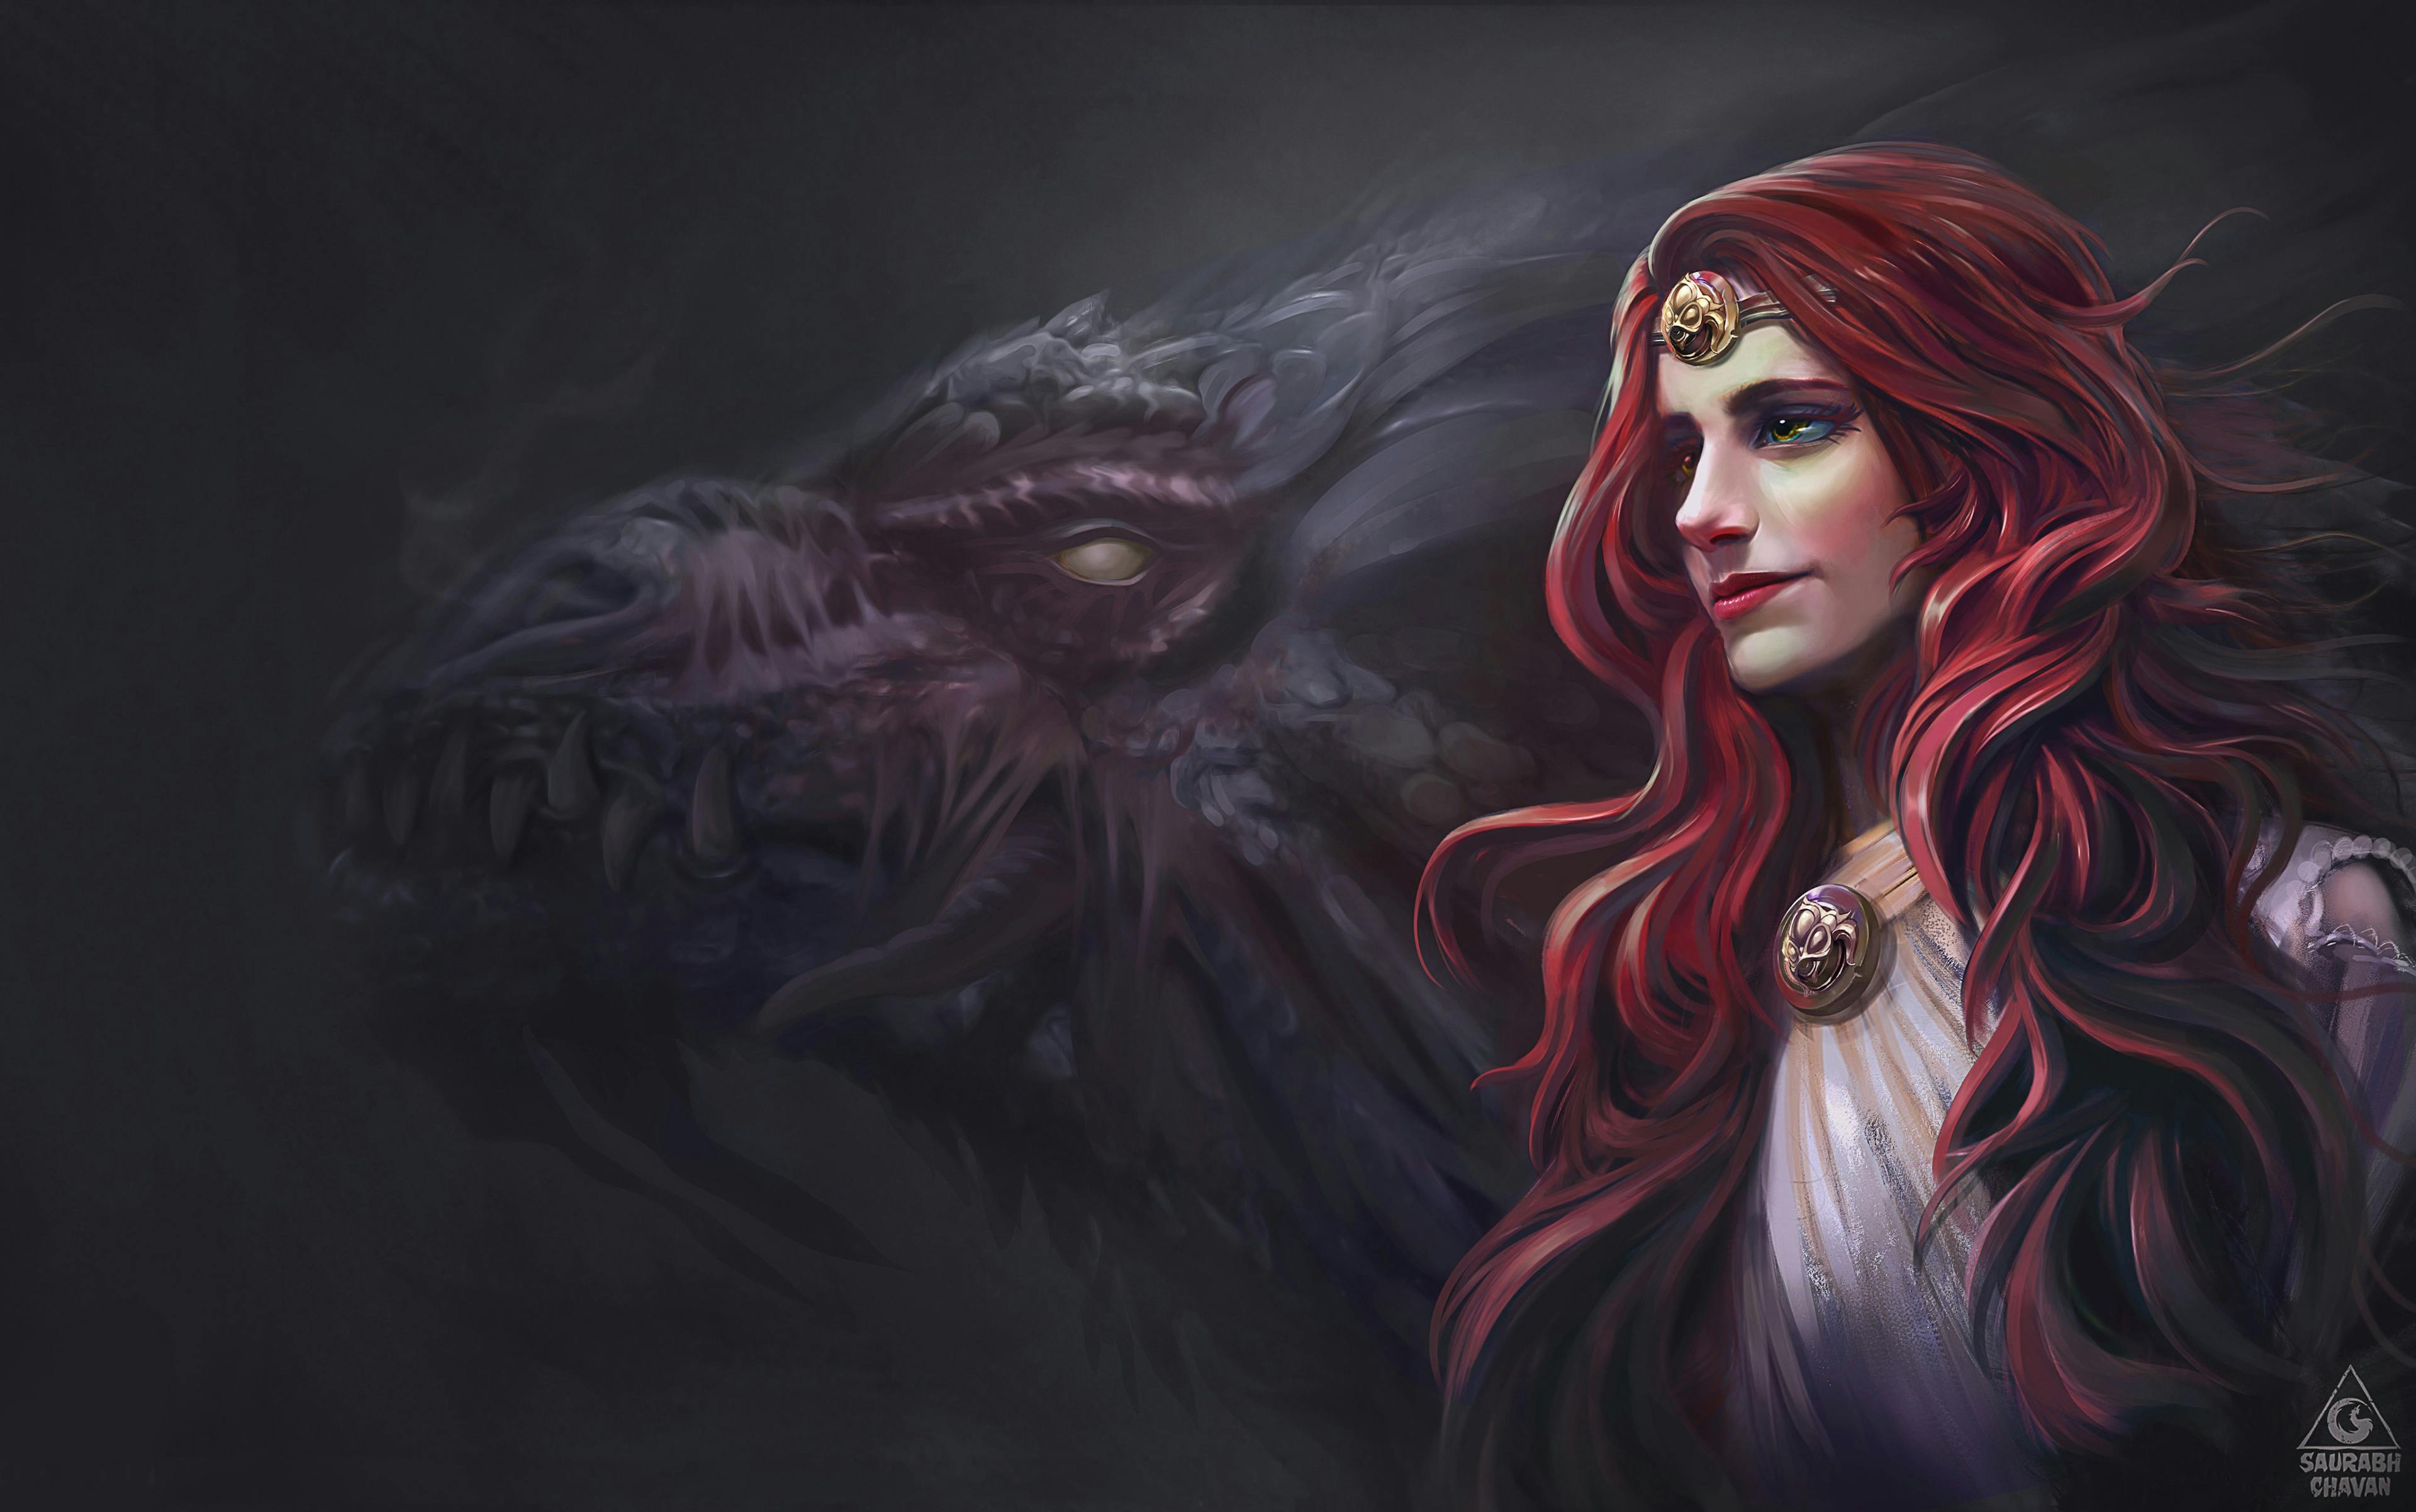 A woman and her dragon